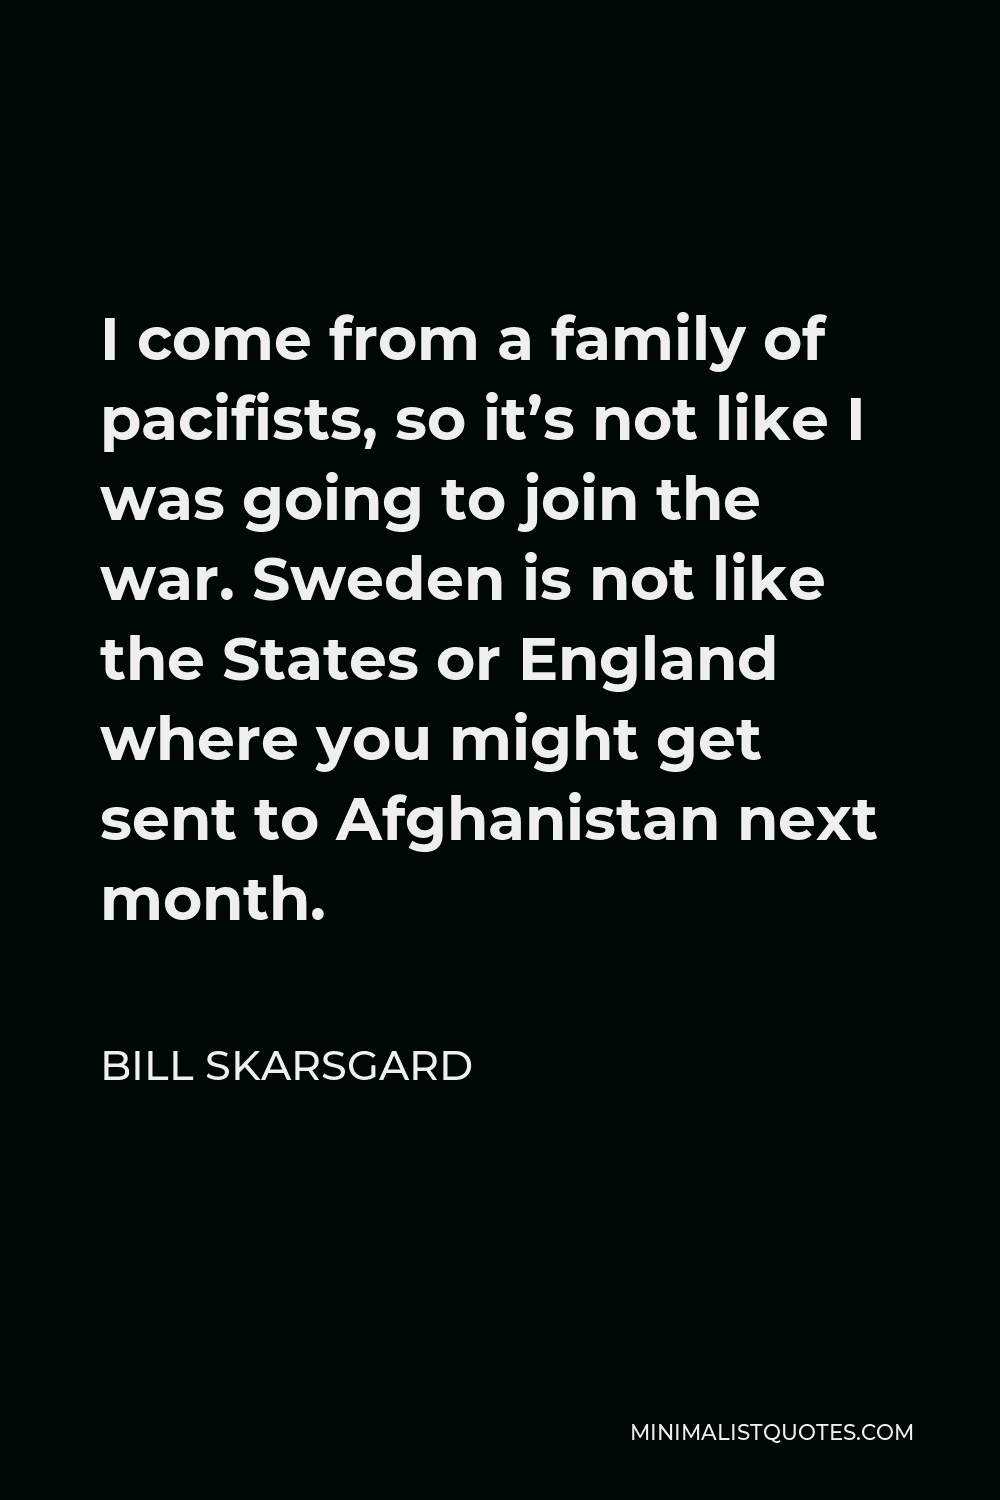 Bill Skarsgard Quote - I come from a family of pacifists, so it’s not like I was going to join the war. Sweden is not like the States or England where you might get sent to Afghanistan next month.